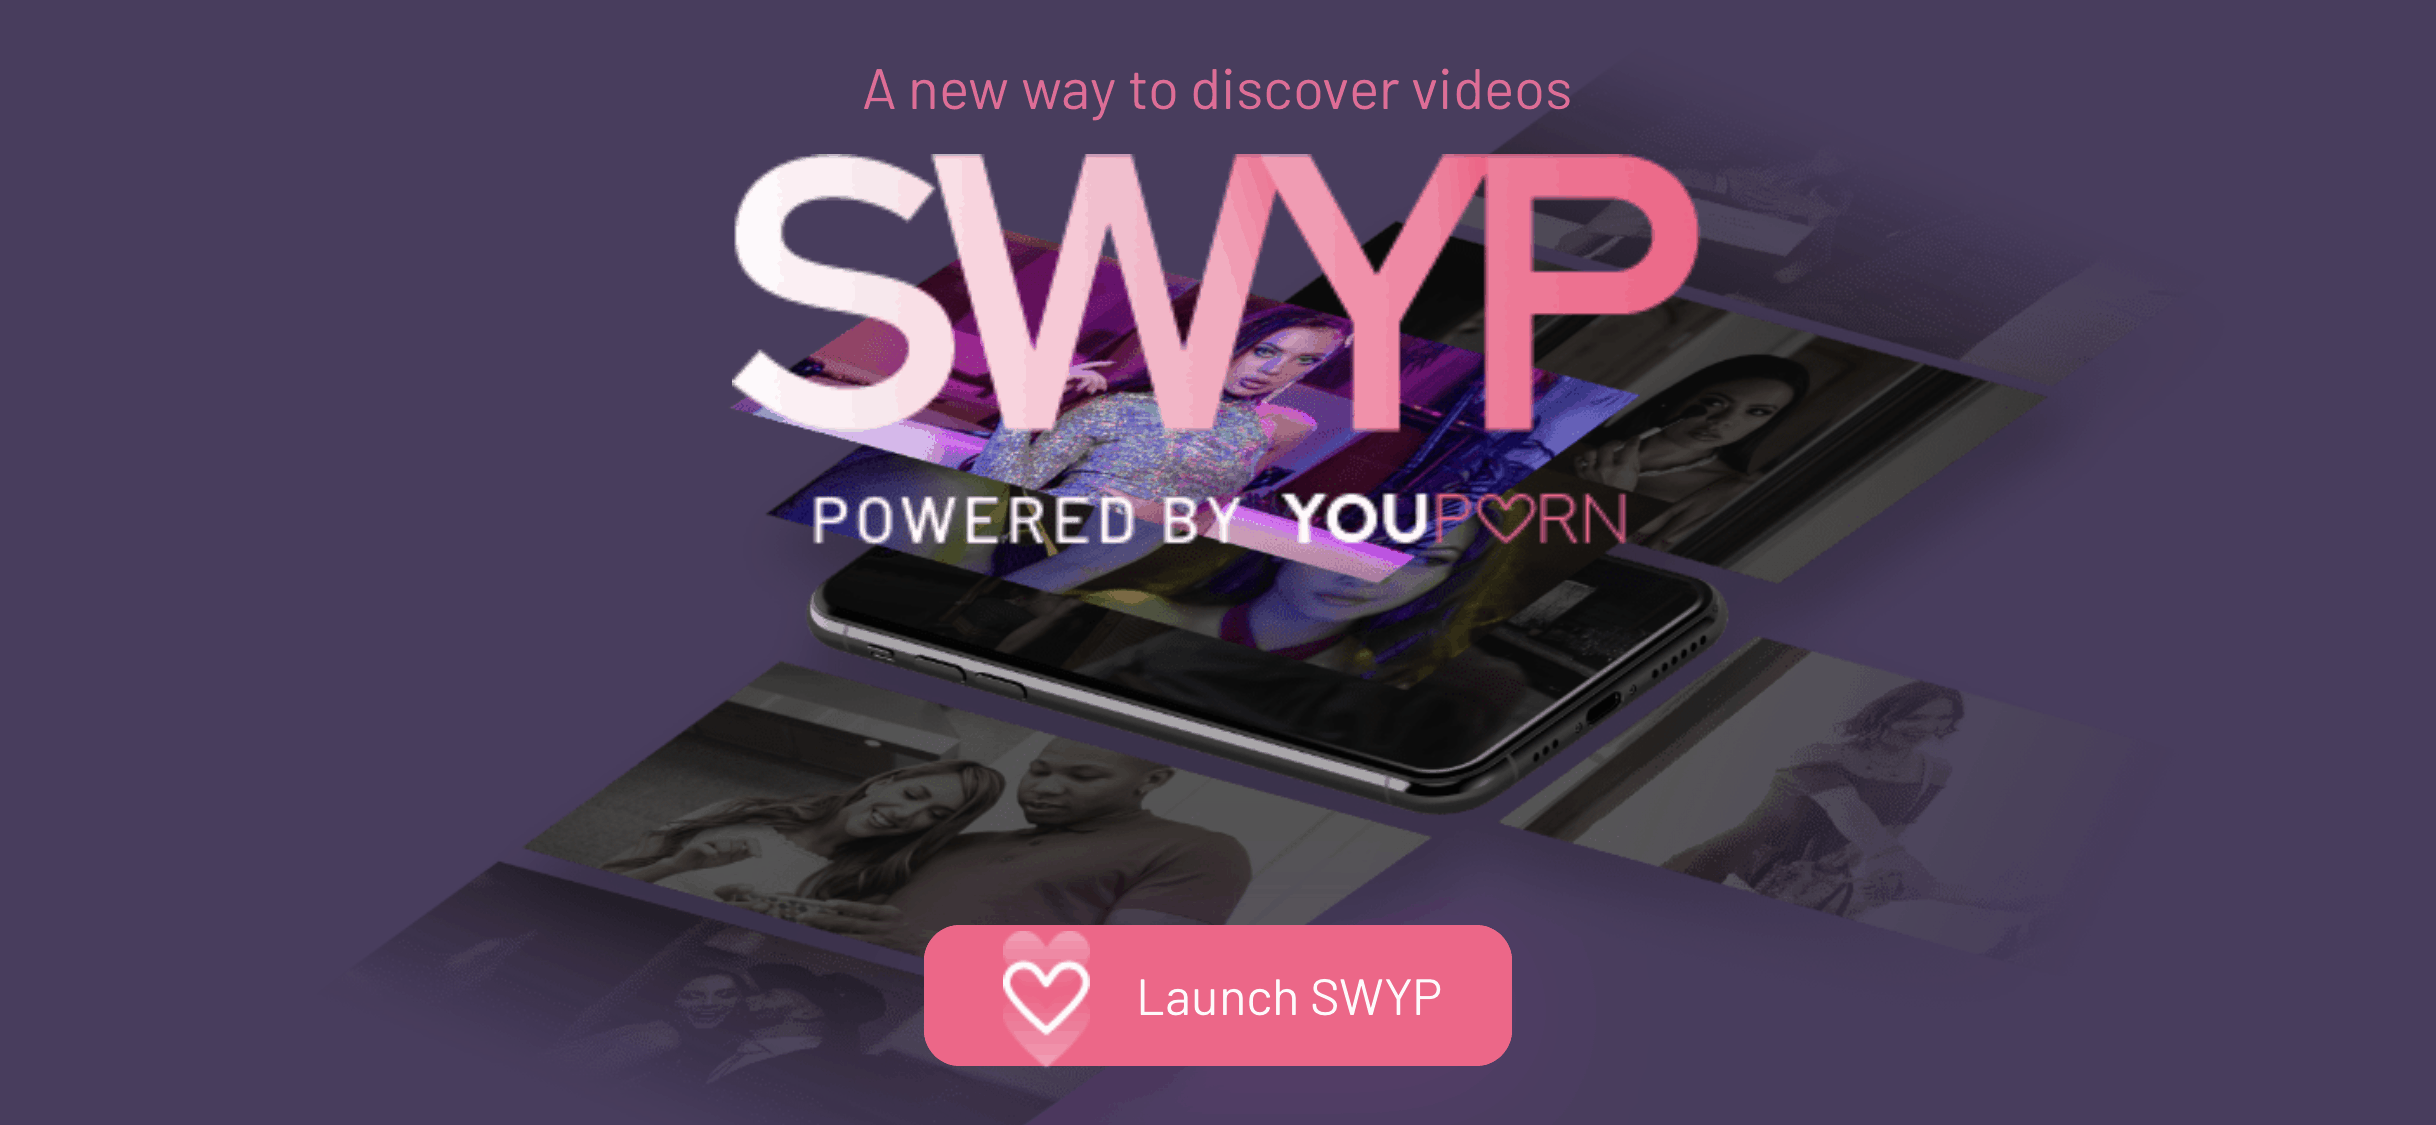 Https Rt Youporn Com Swyp Main Page